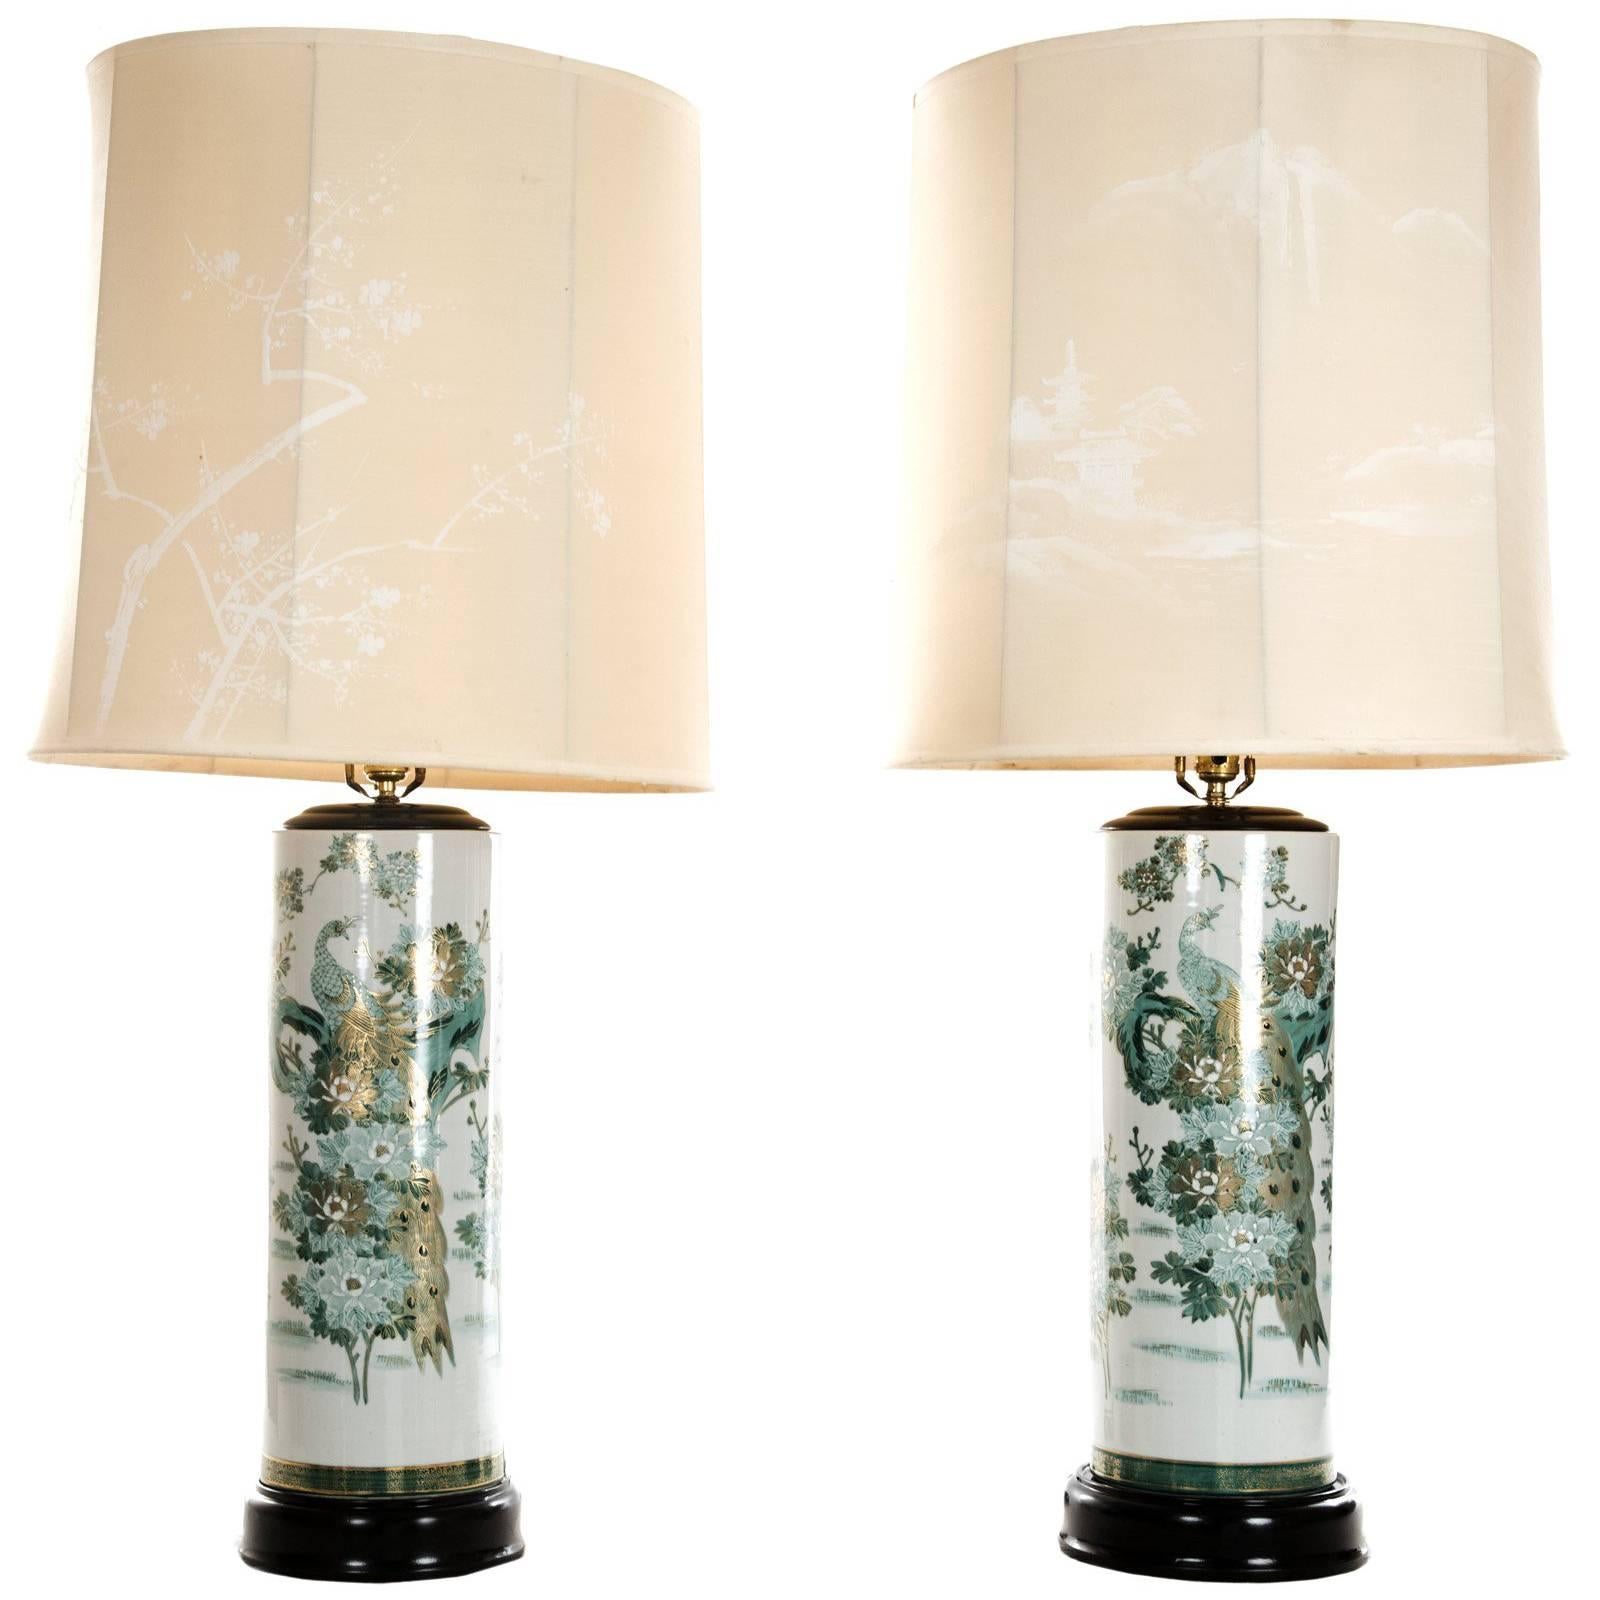 Pair of Japanese Kutani Porcelain Table Lamps with Hand-Painted Natural Imagery